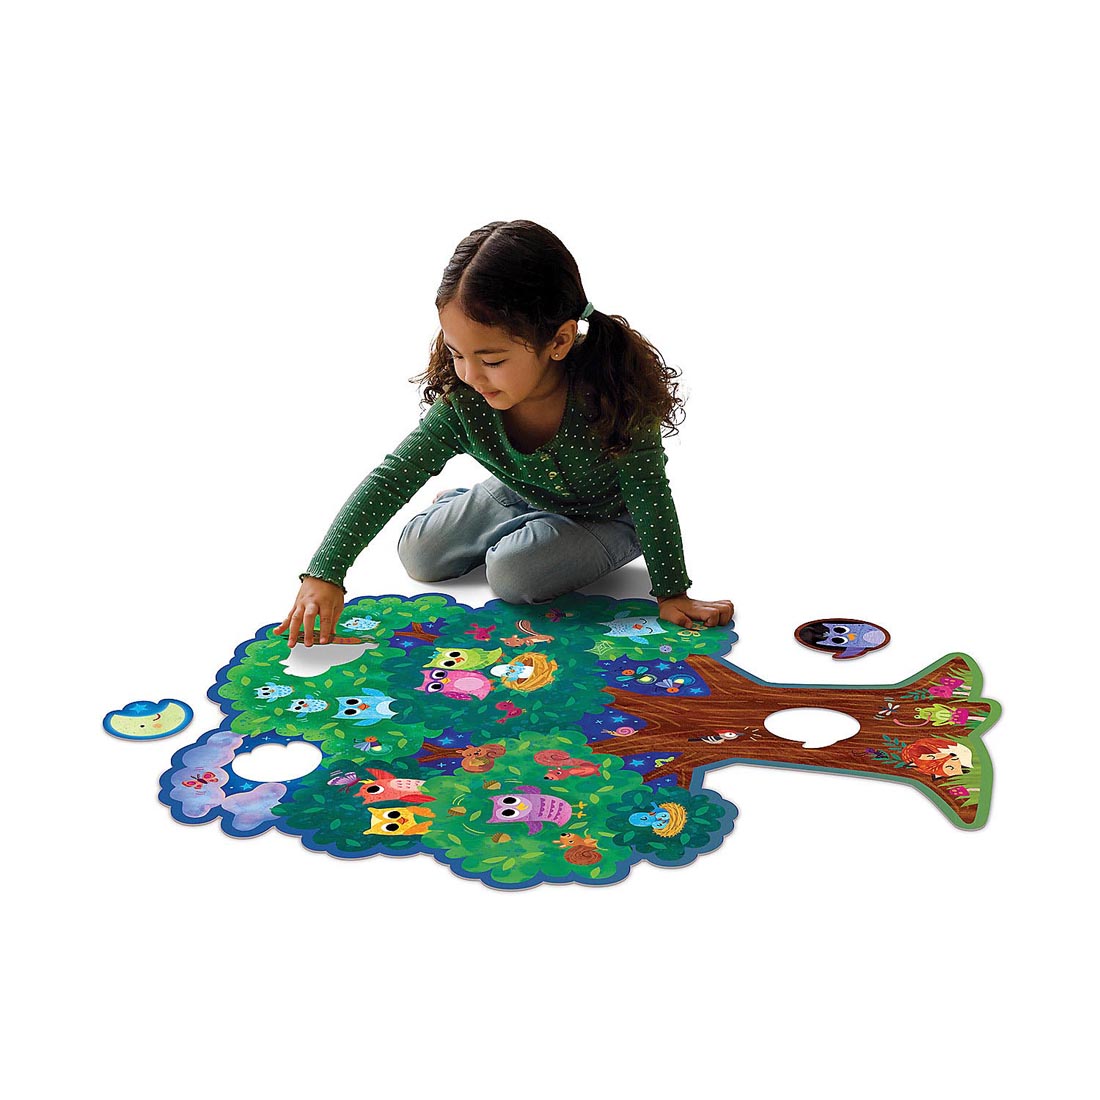 Child completing the Hoot Owl Hoot Floor Puzzle by Peaceable Kingdom